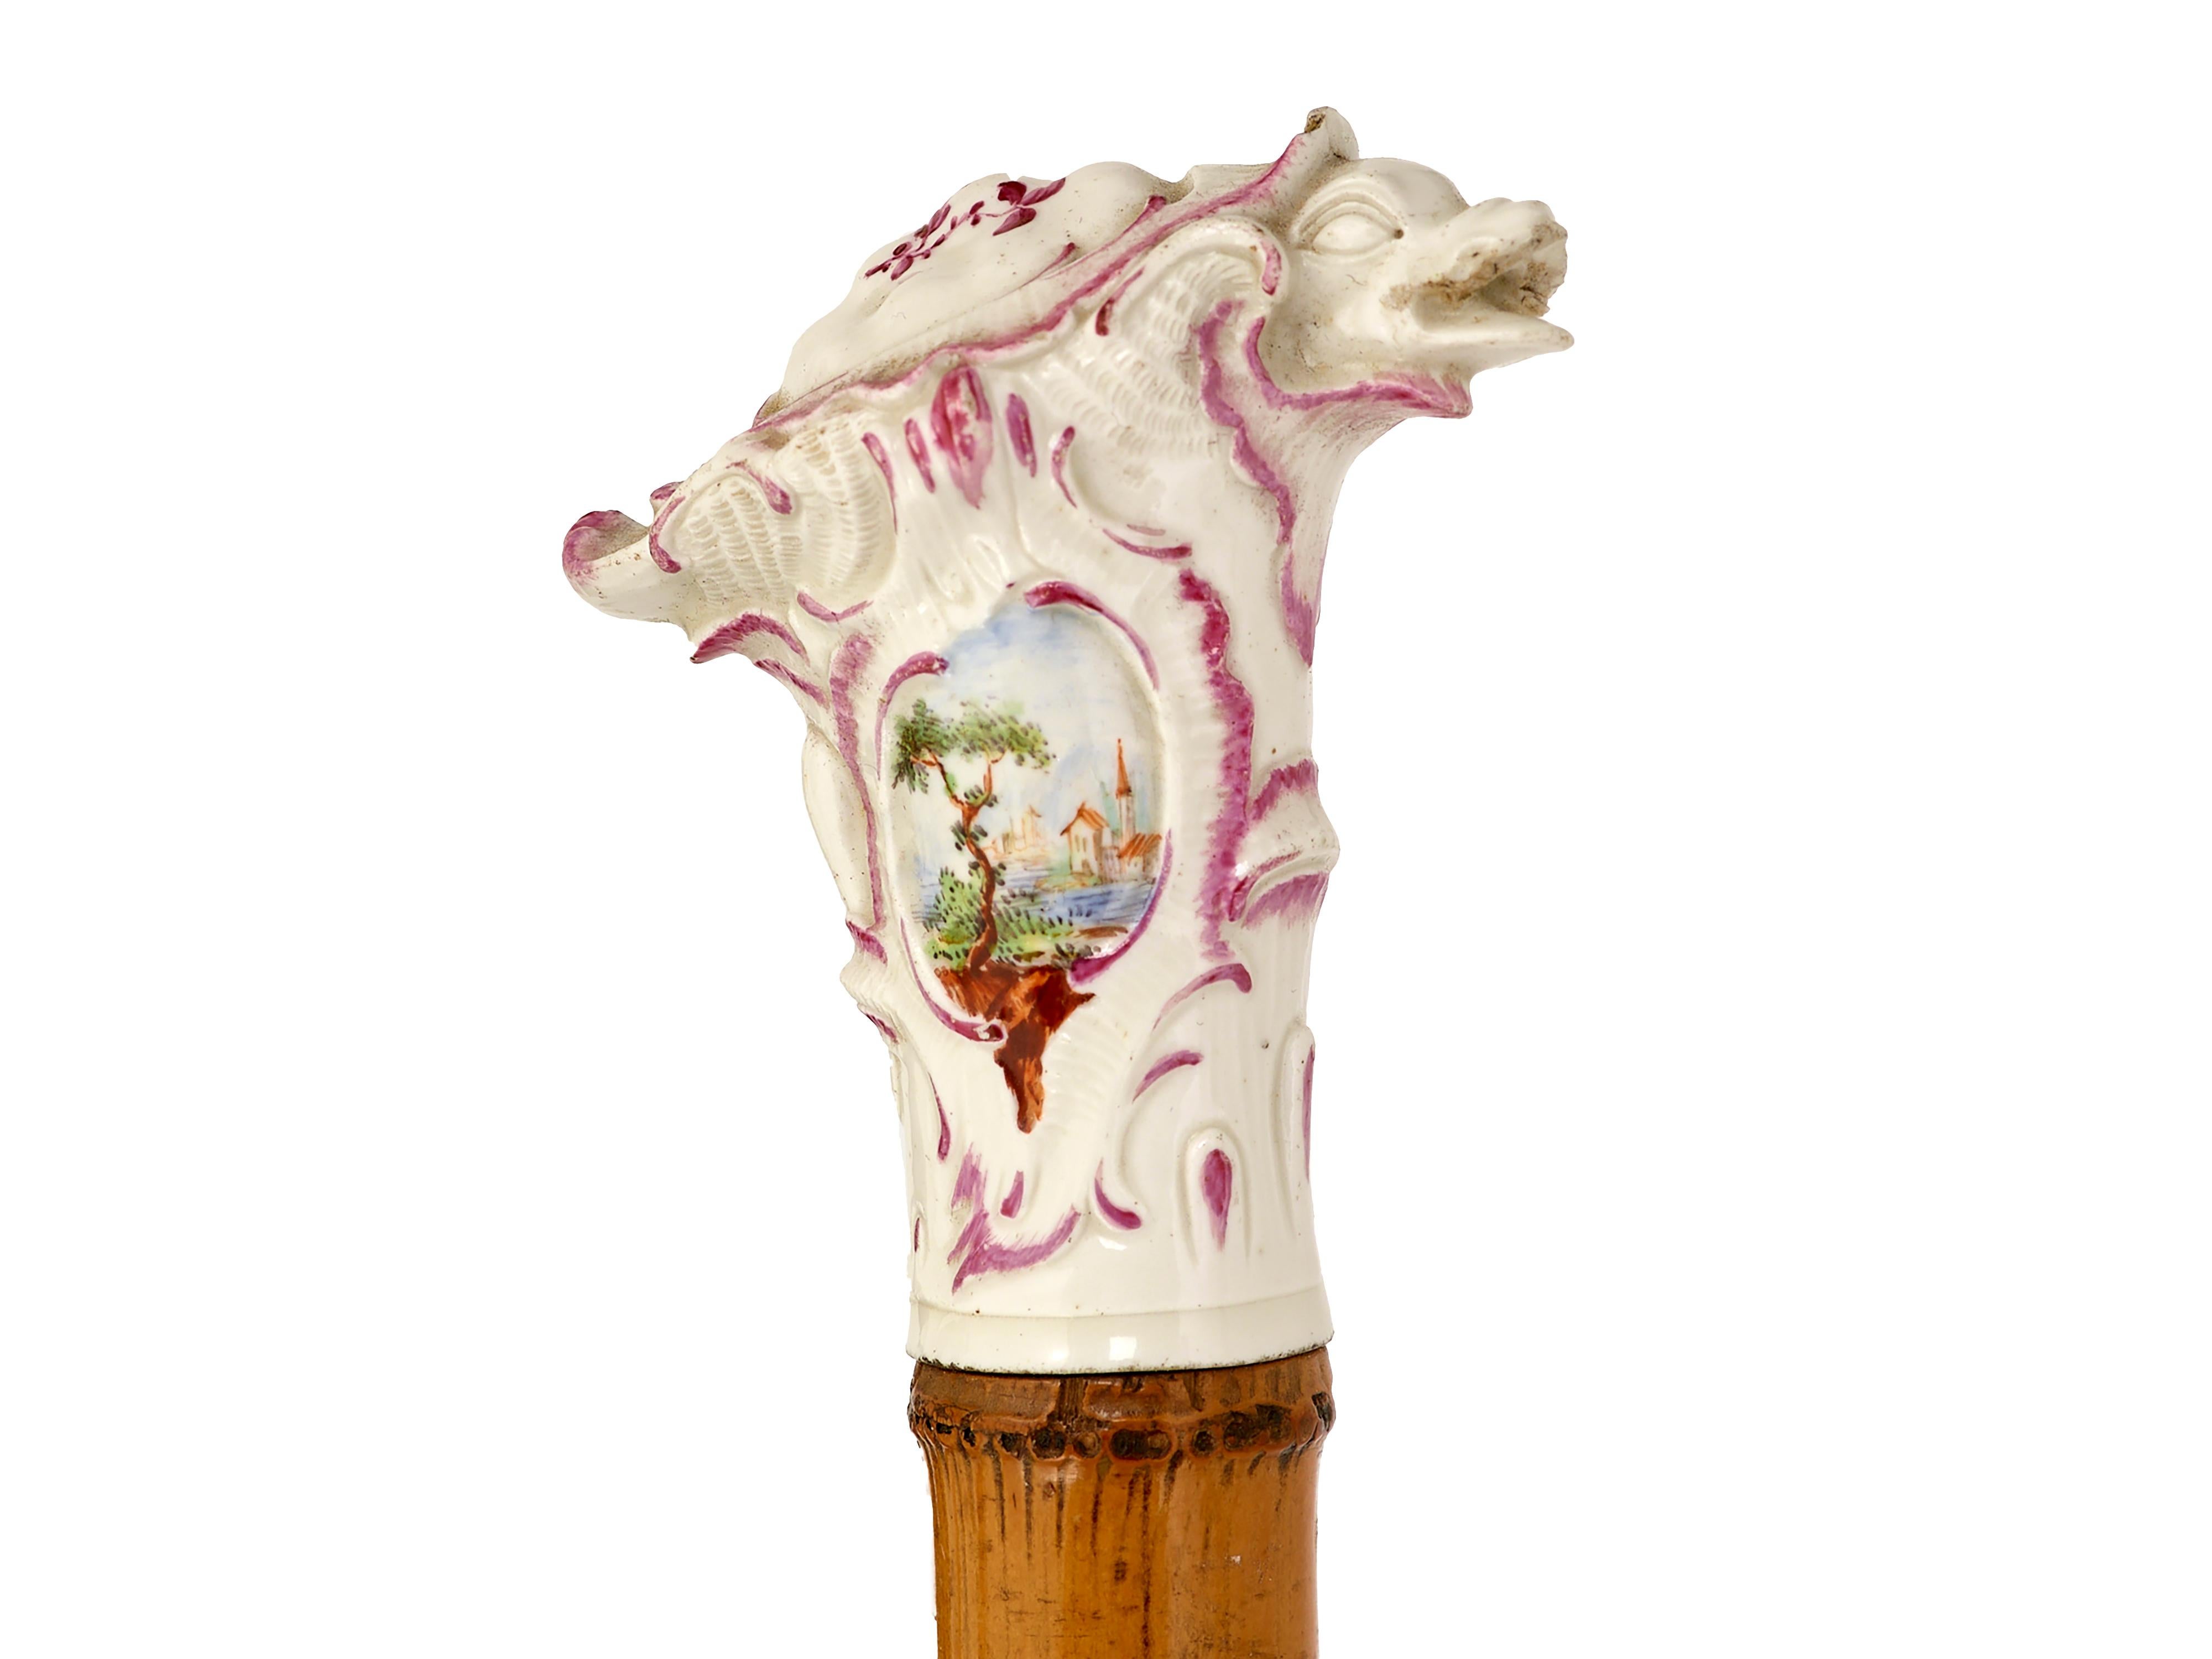 Turtle top walking cane
Meissen porcelain top depiction of a turtle, on original cane shaft with horn ferrule. Nautical views hand painted with magenta highlights. circa 1850. L 91, w 6. d 3. Germany
